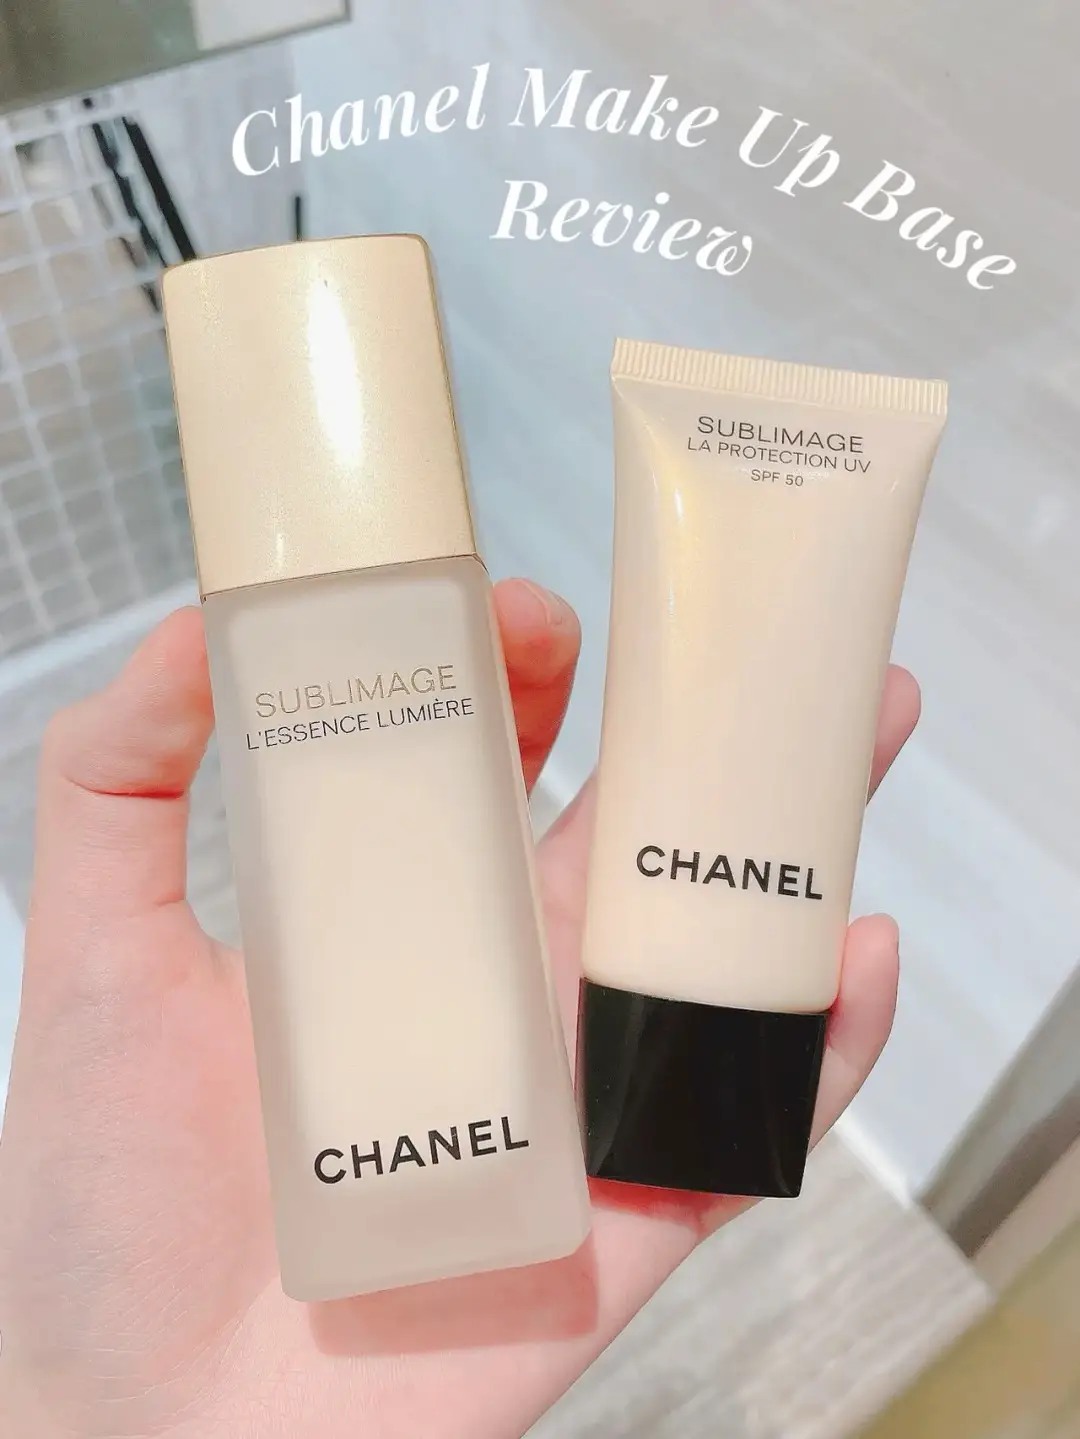 Chanel Make Up Base Review, Gallery posted by Ashy Patterson